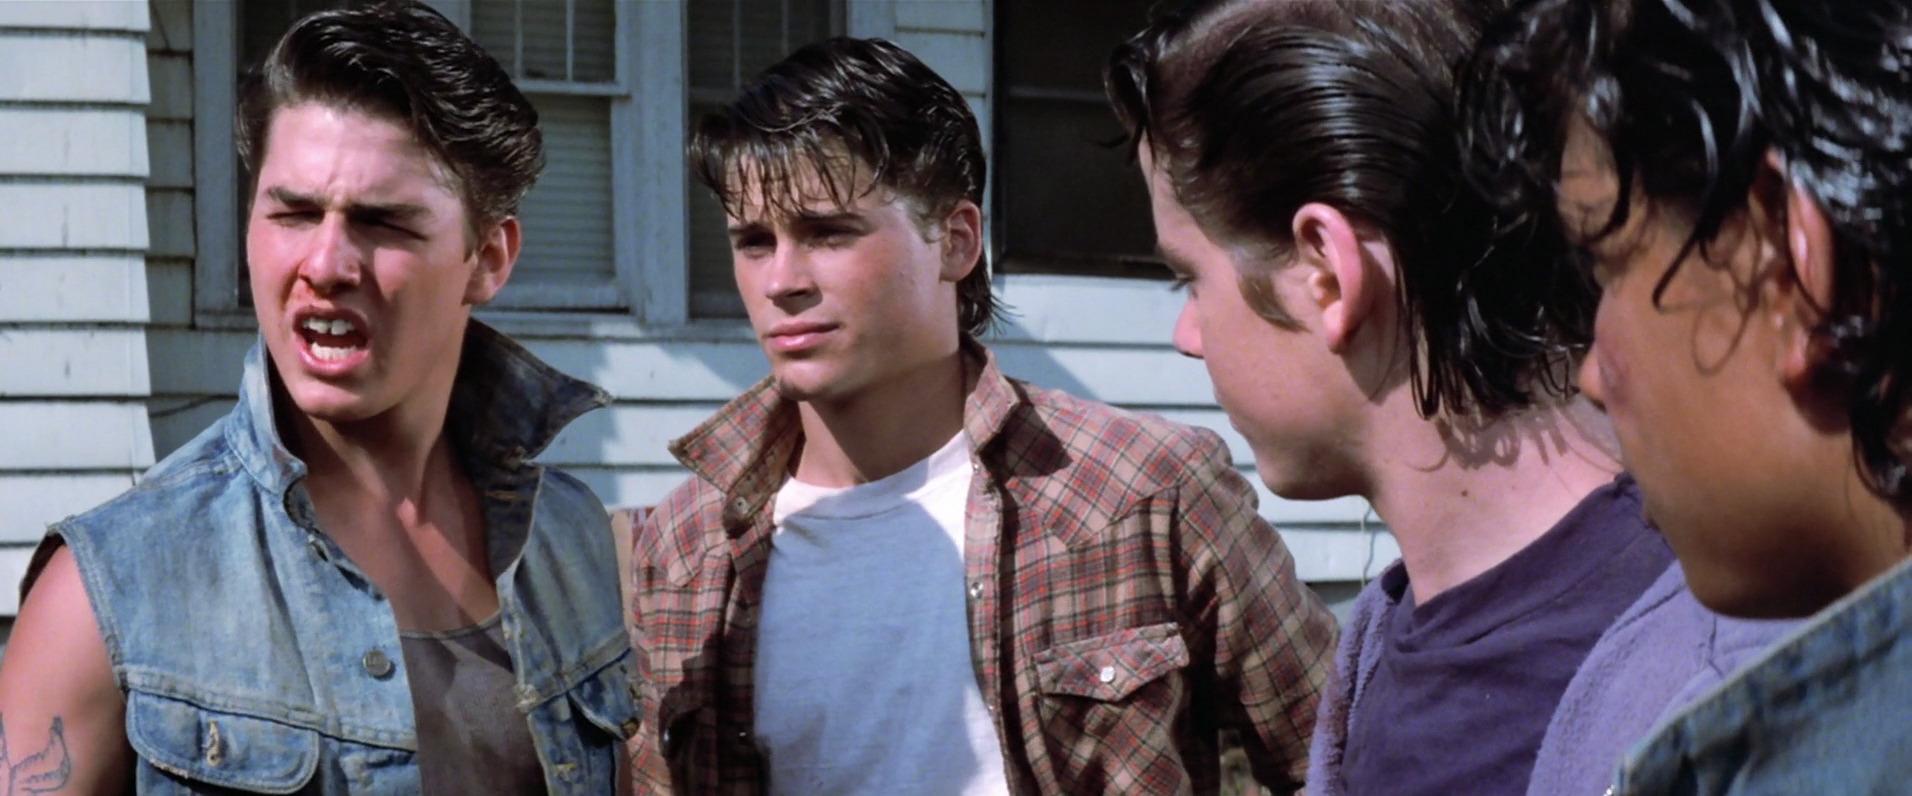 the outsiders movie free online no download